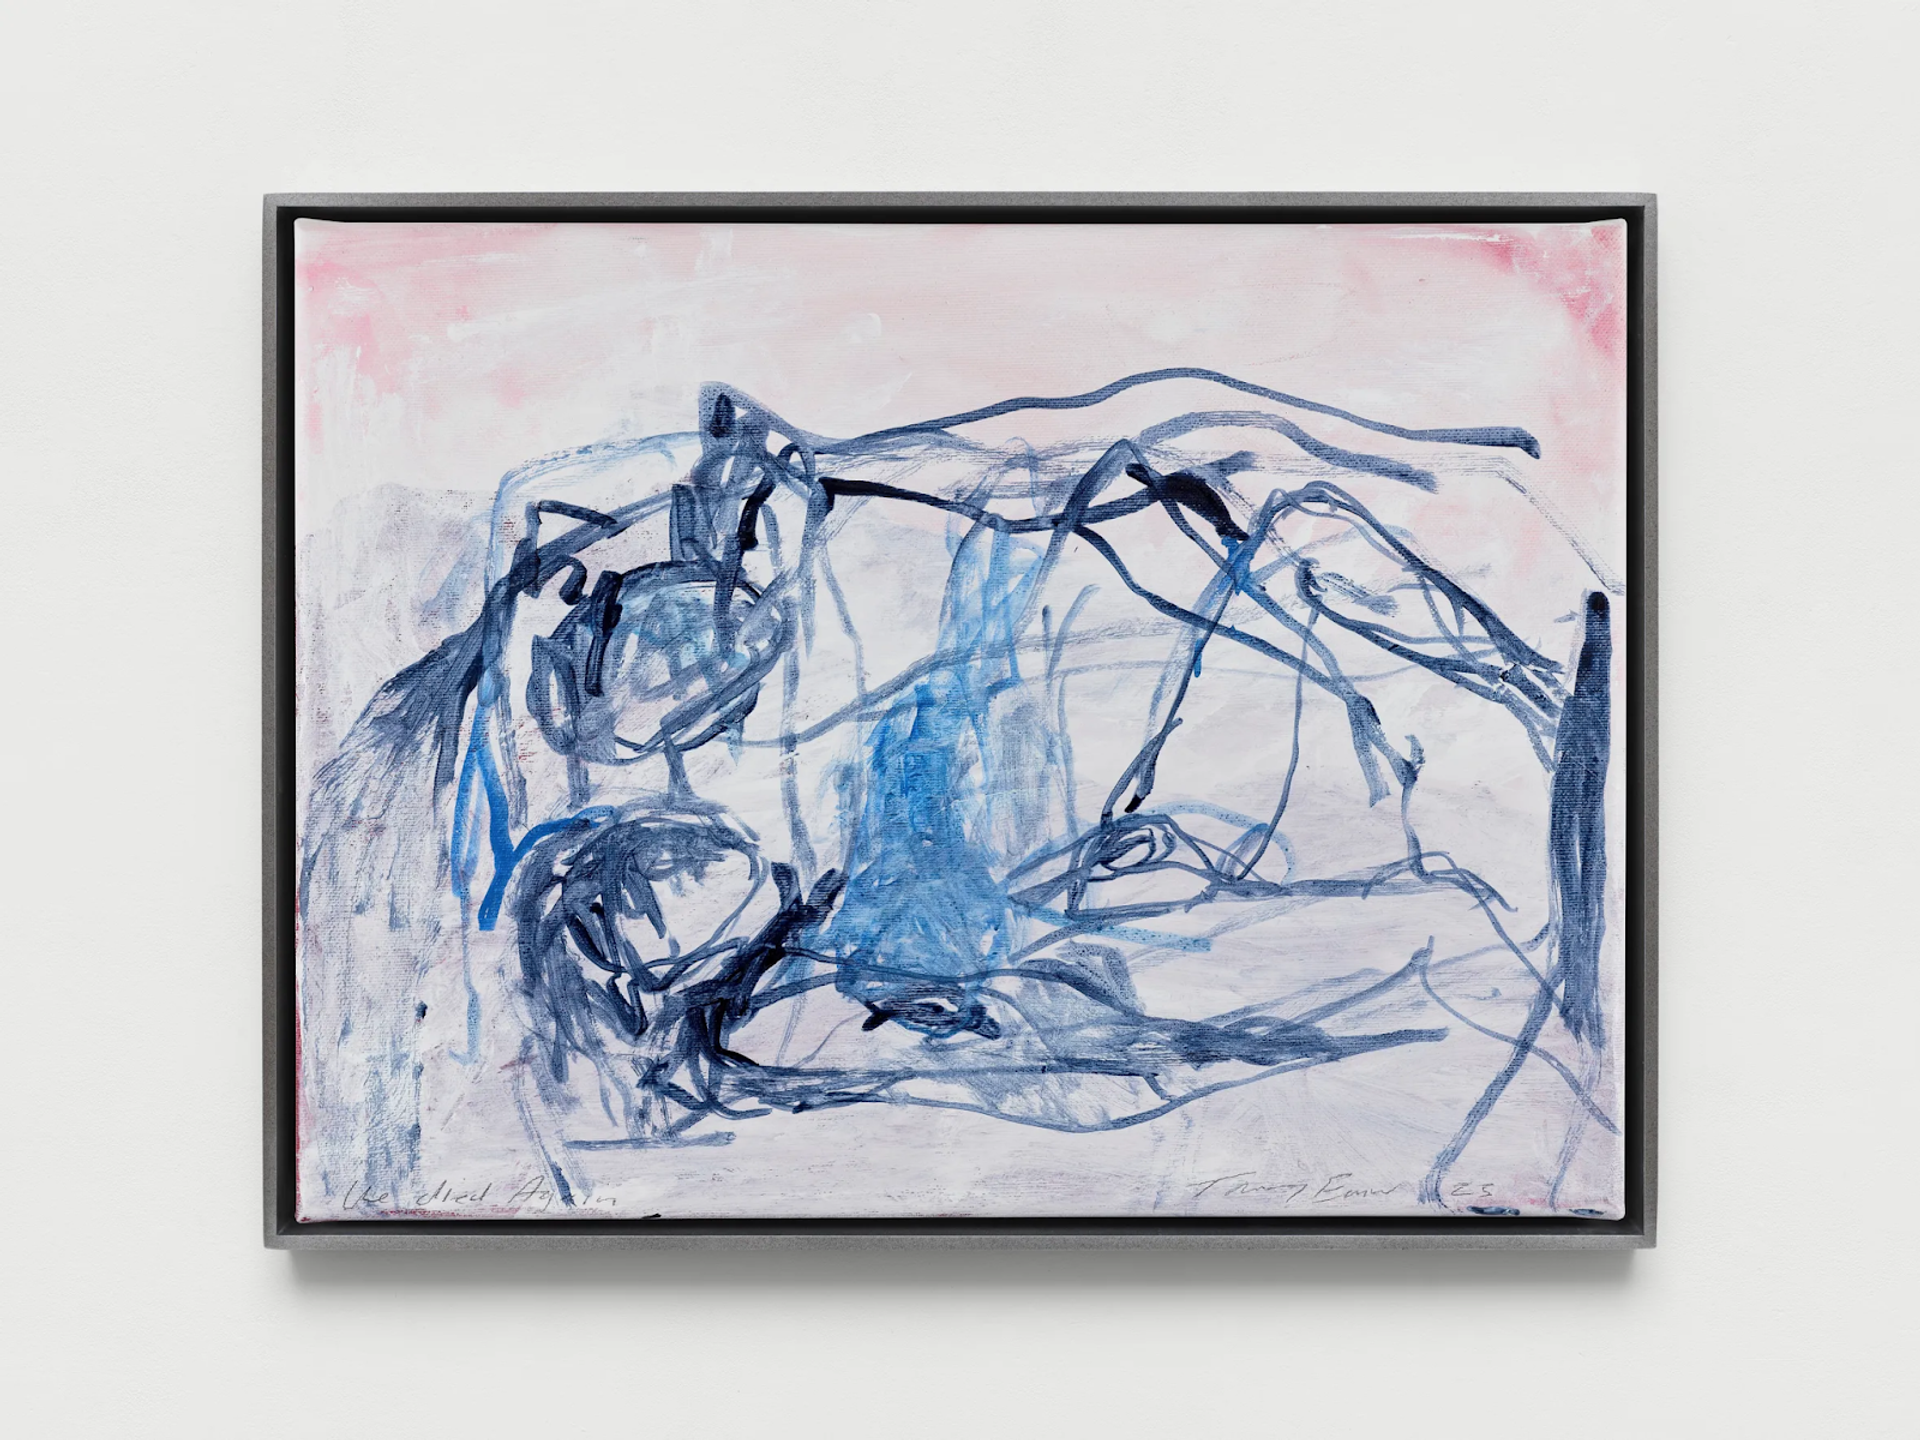 Tracey Emin’s We Died Again. A portrait of two lovers in a bed engaging in intercourse in blue paint against a soft pink background.